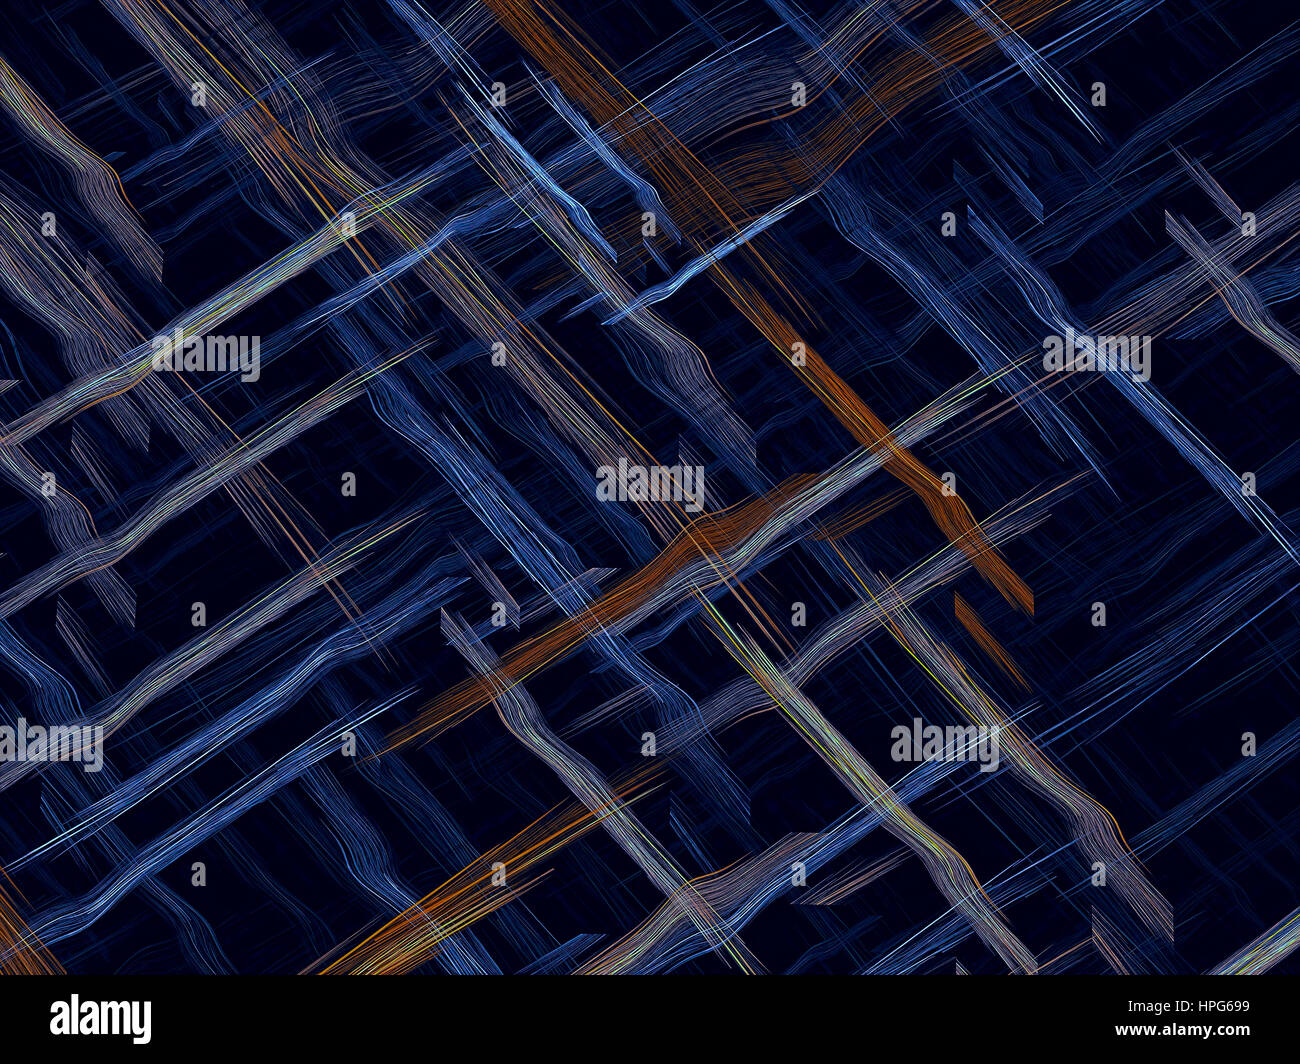 Interwoven stripes - abstract digitally generated image Stock Photo